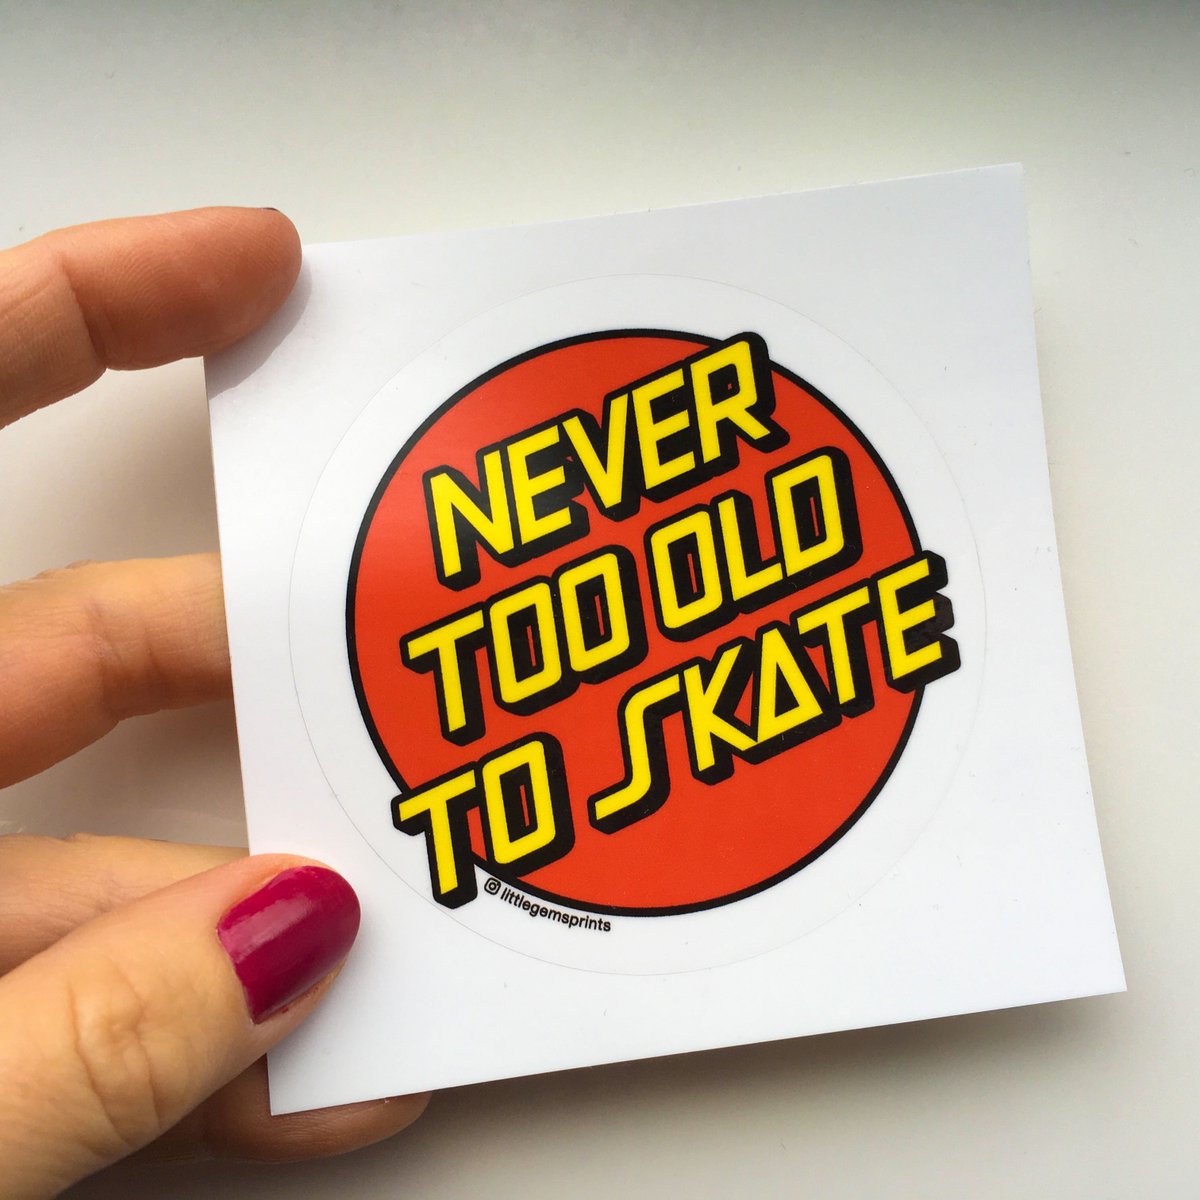 They're here! My first vinyl stickers!!! etsy.me/2KB5Vd2

#HandmadeHour #skateboardsticker